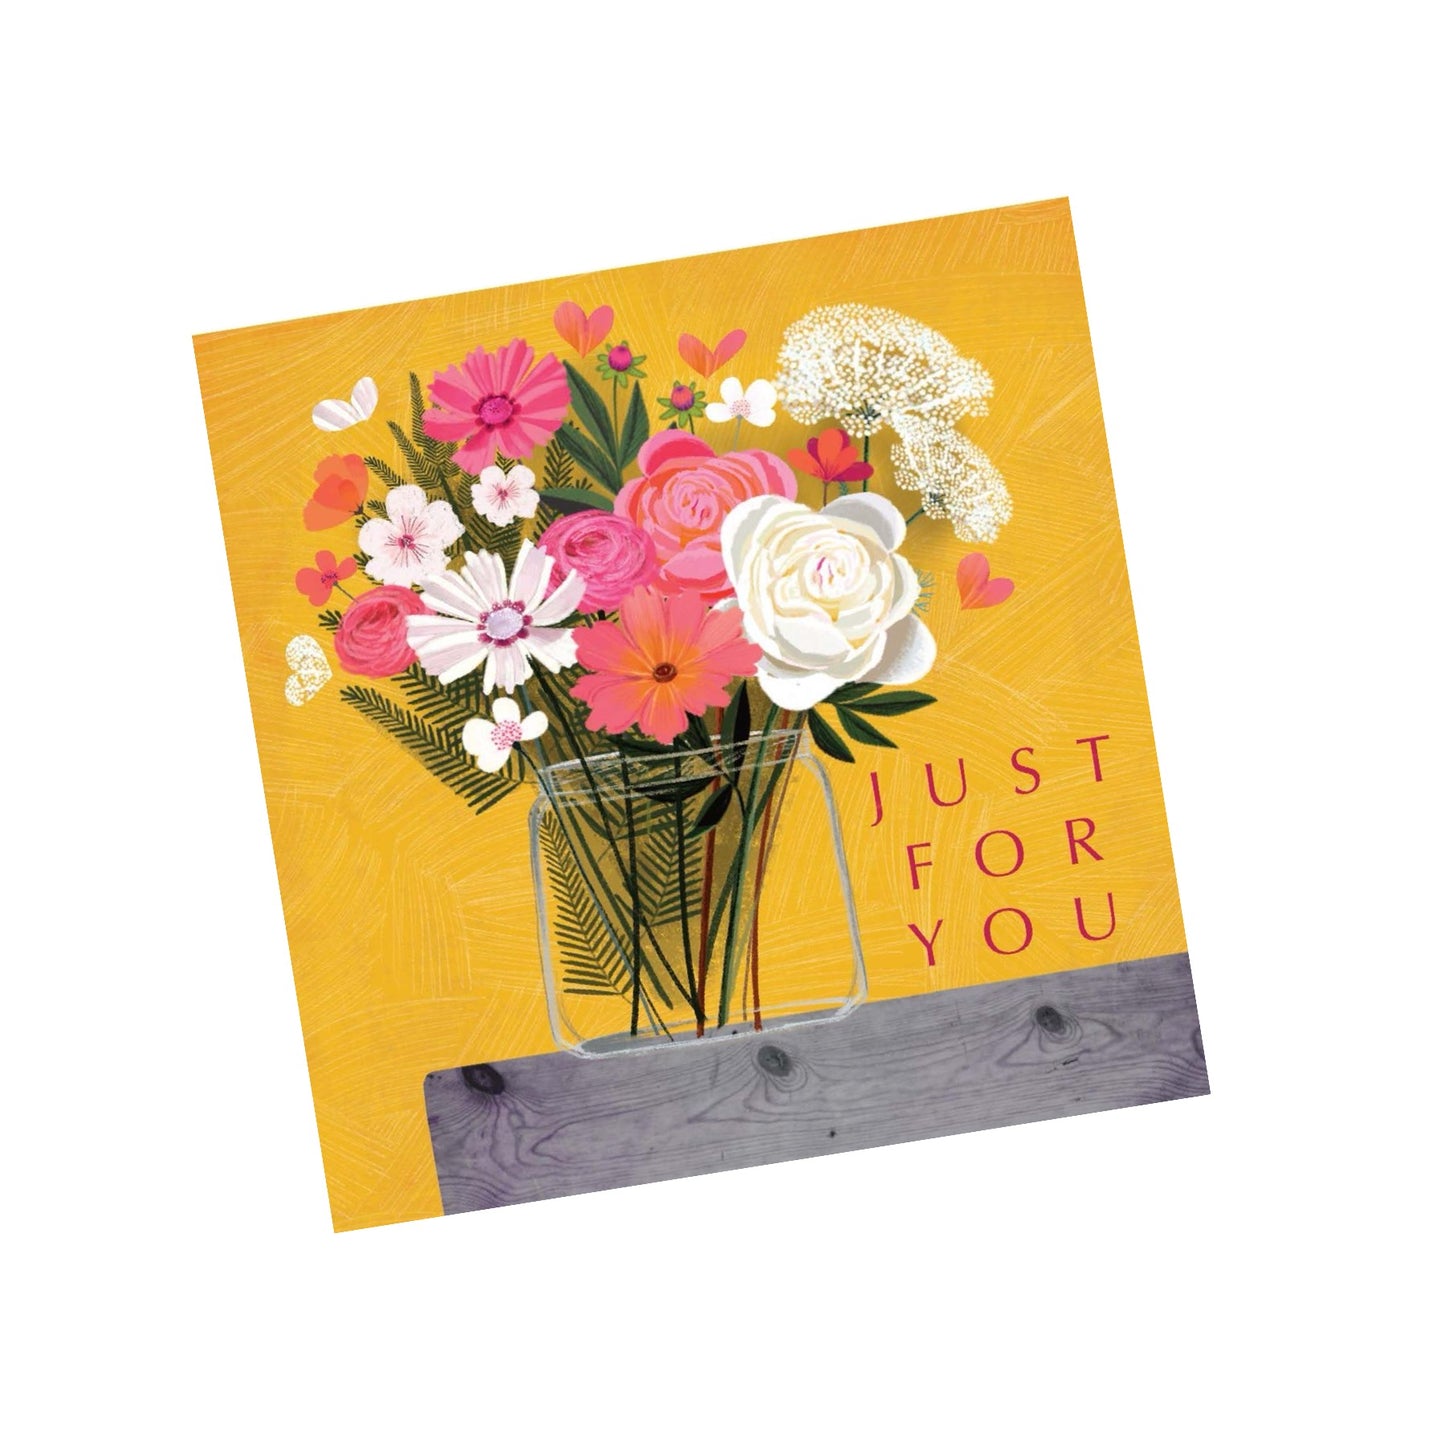 NUOVO - "FOR YOU FLOWERS" SMALL GREETING CARD